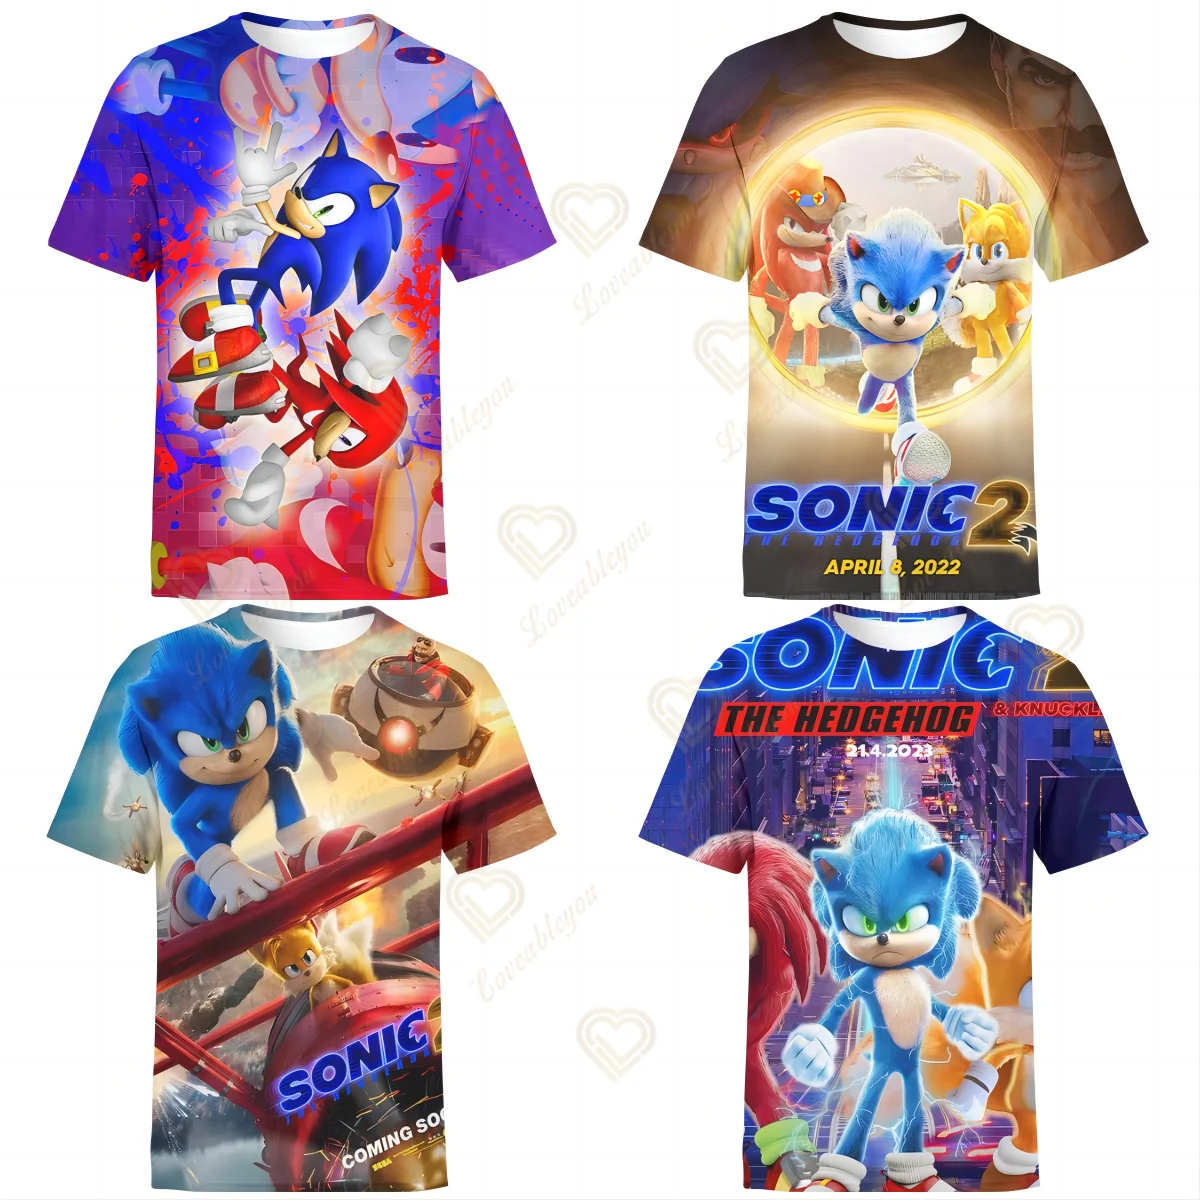 

Cool Summer 3D Men's Printed T-shirt Child Sonic Shirt Pink Hip-hop Funny O-neck Short-sleeved Young Handsome High-quality Top